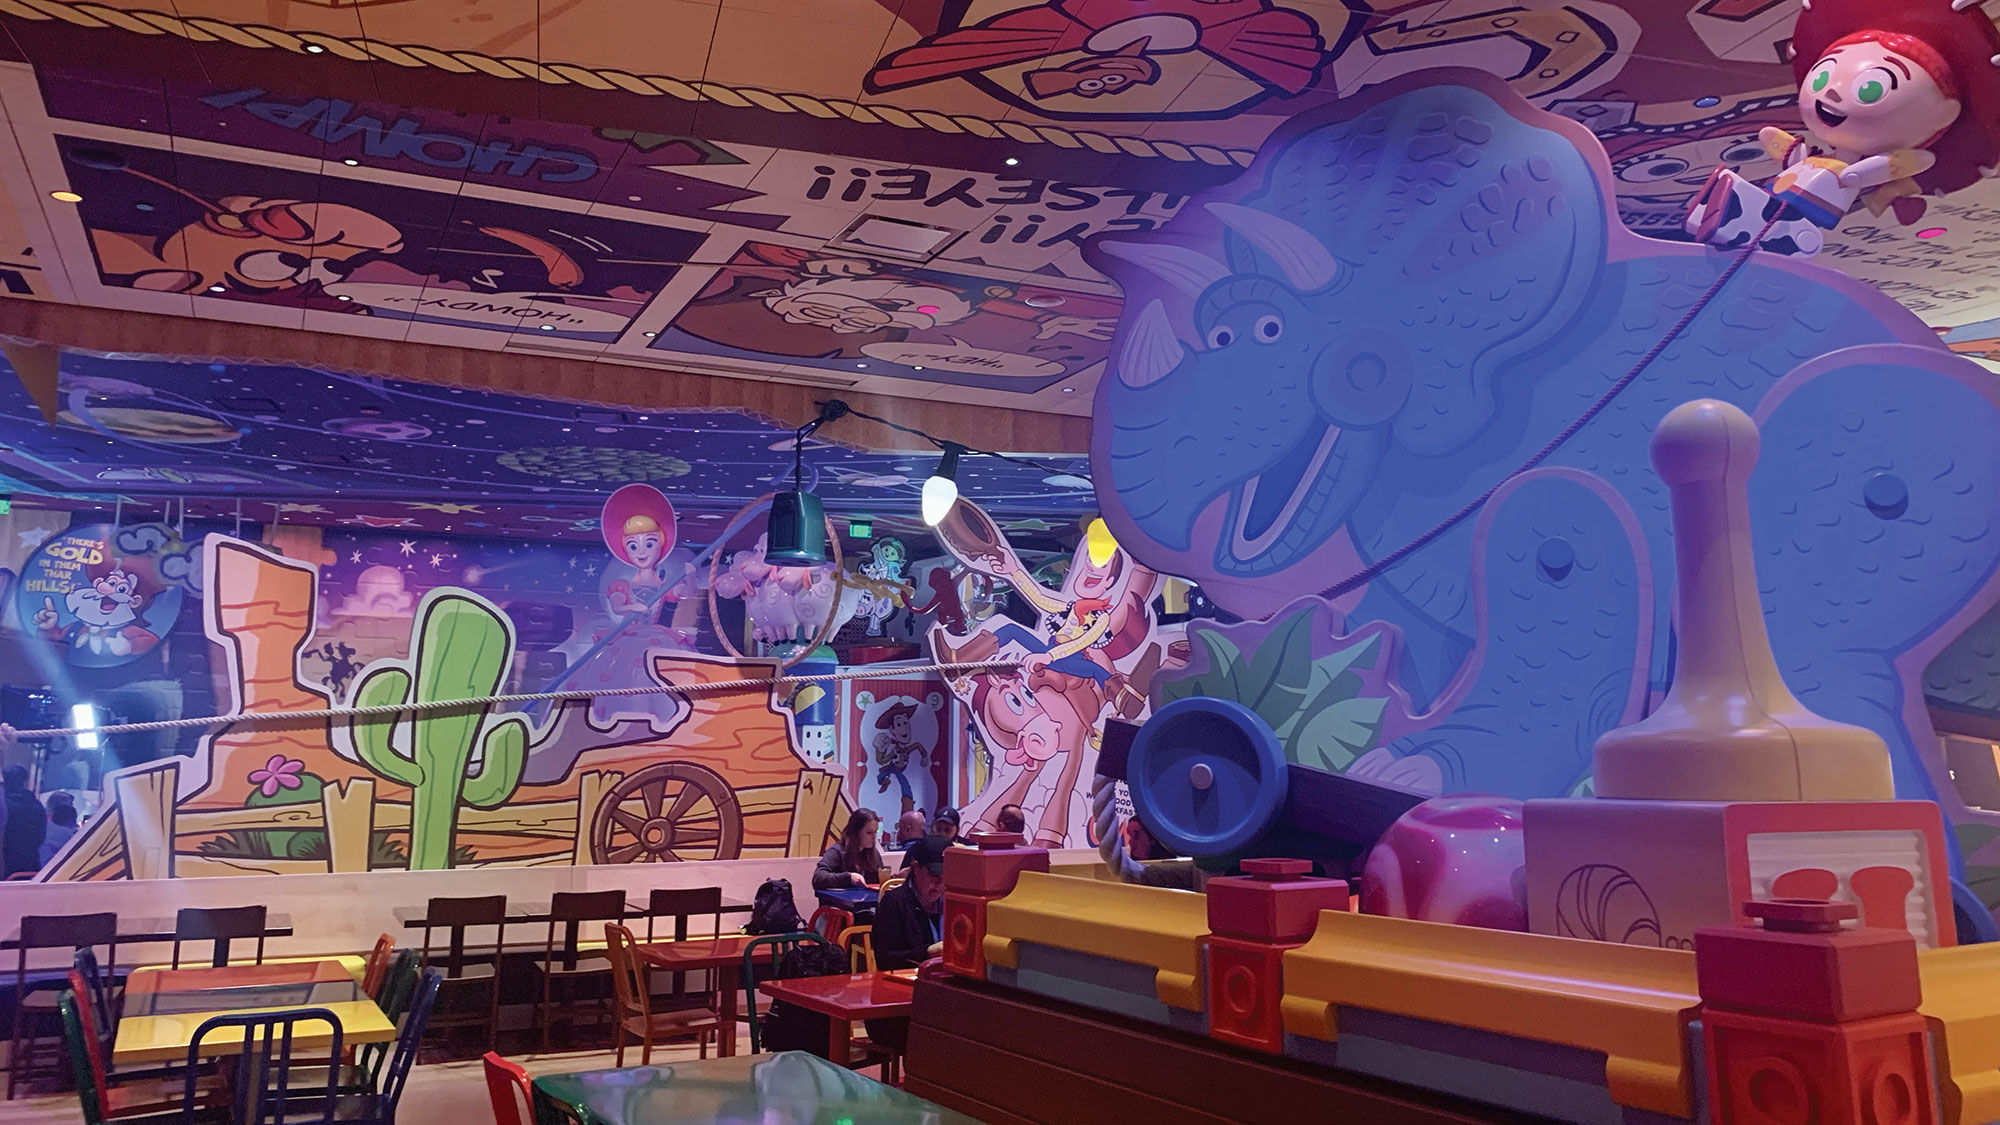 Inside the restaurant, guests become the size of toys and are greeted by larger-than-life toy pieces, including Jessie riding Trixie the triceratops.